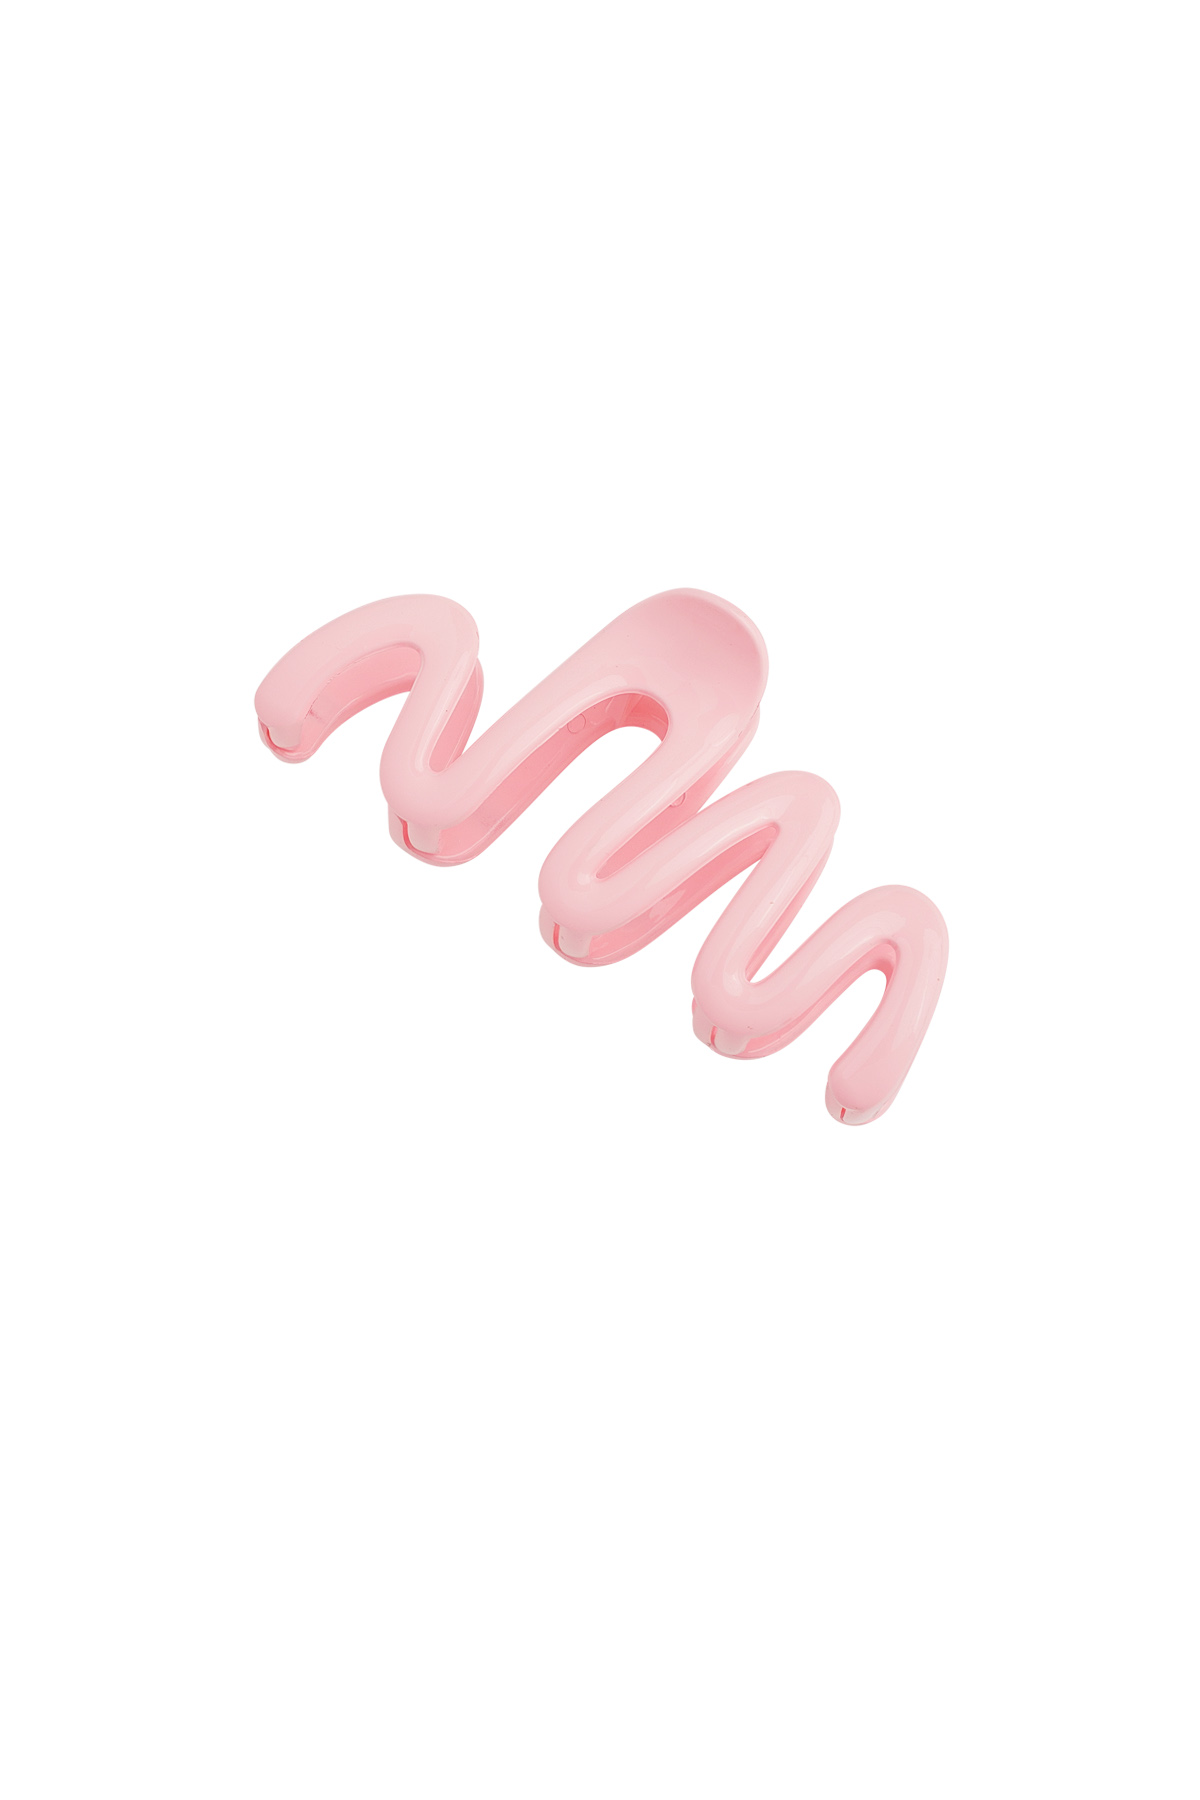 Hair clip aesthetic zigzag - pink